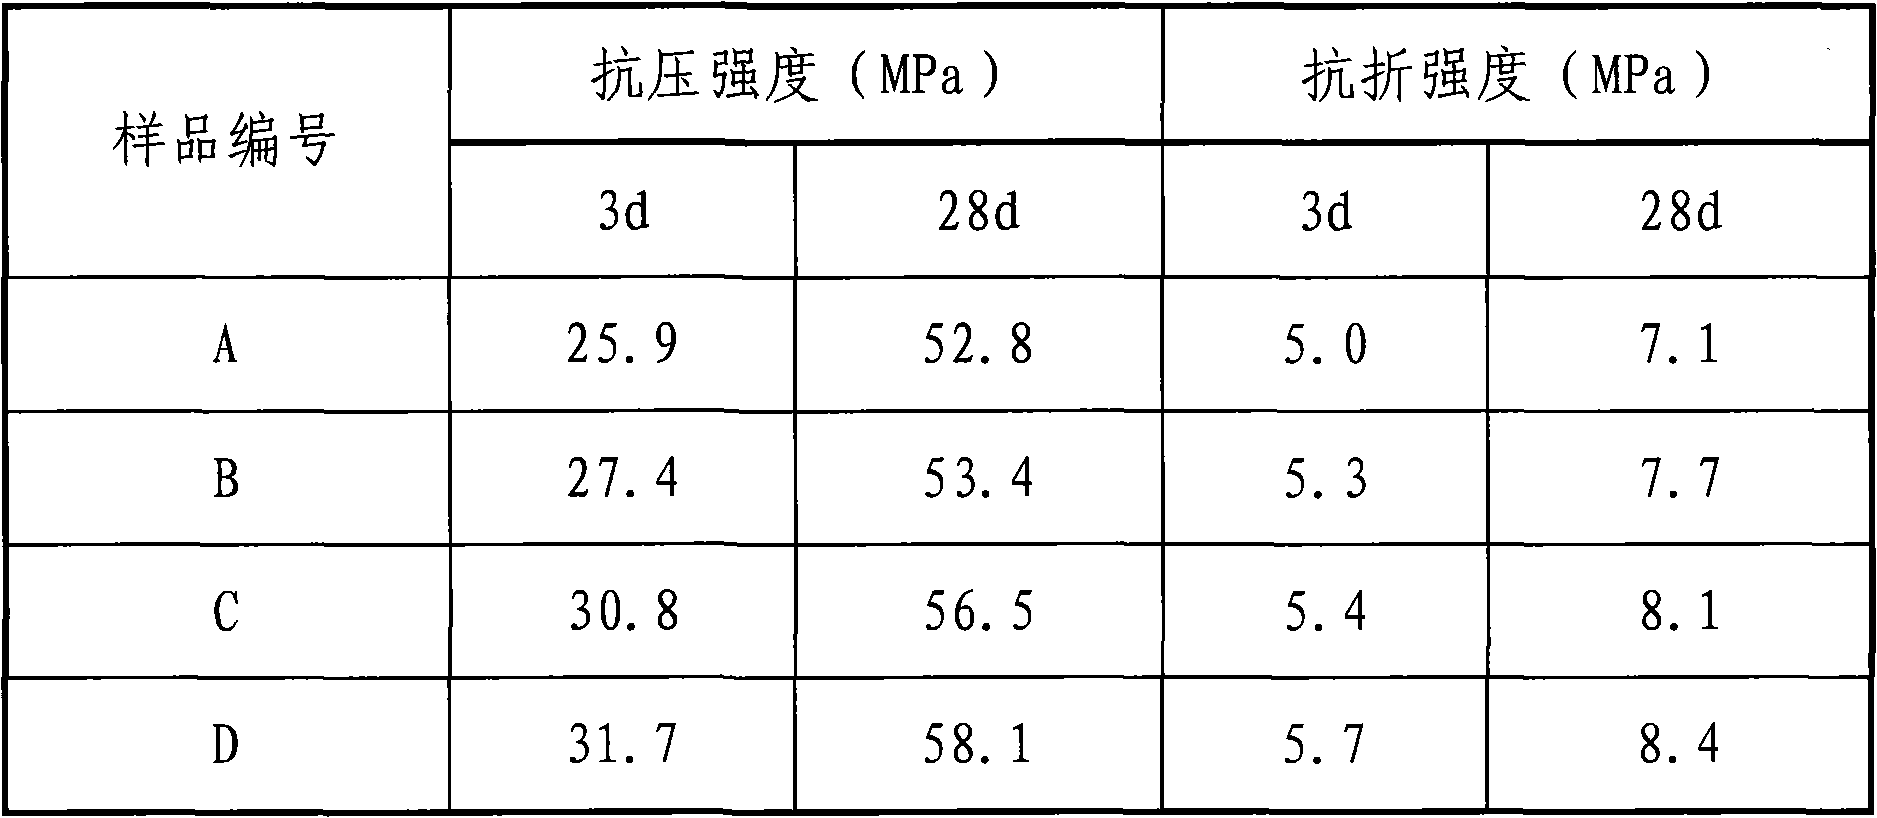 Method for co-producing cement, sulfuric acid and gypsum by using lead-zinc tailings and acid-leaching electrolytic manganese residues as main raw materials